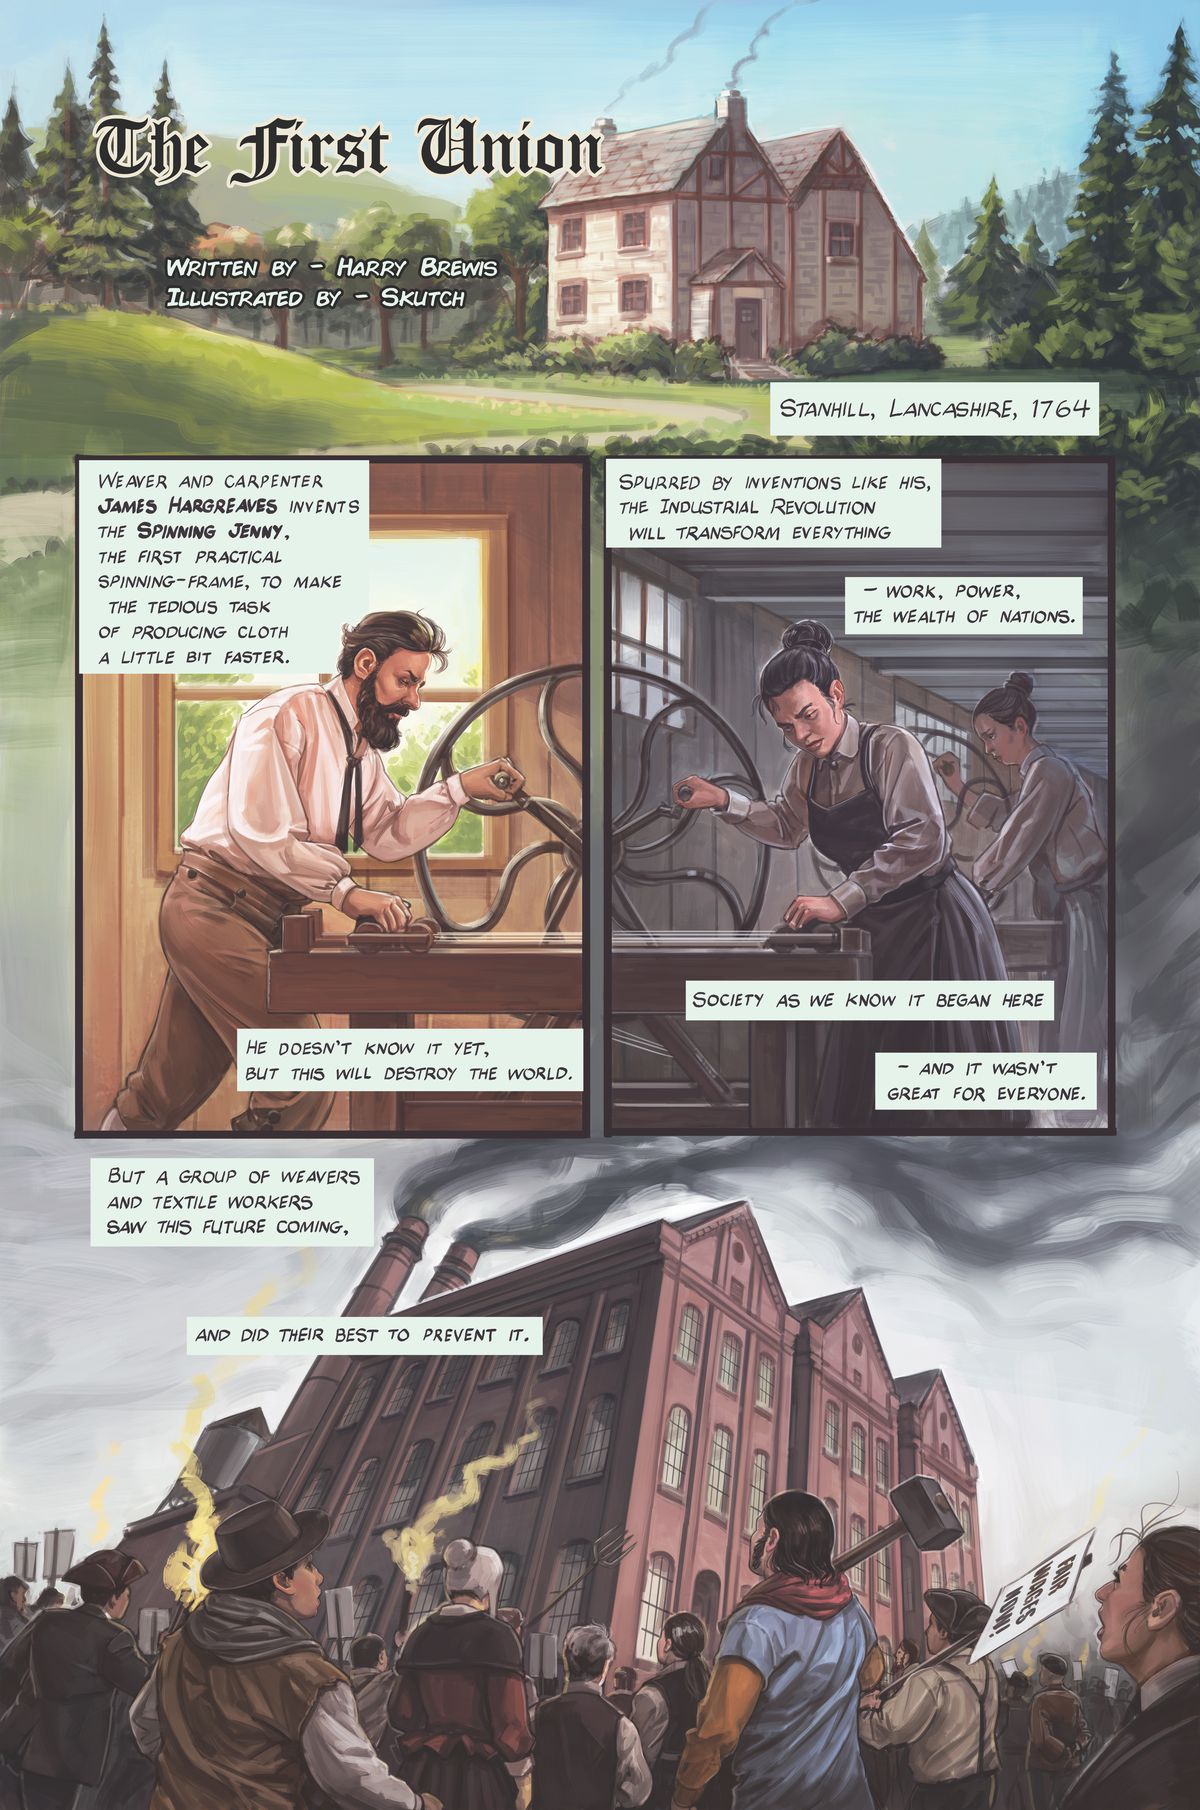 An introduction to a comic about early proto-labor unions and their struggles against early industrialization.